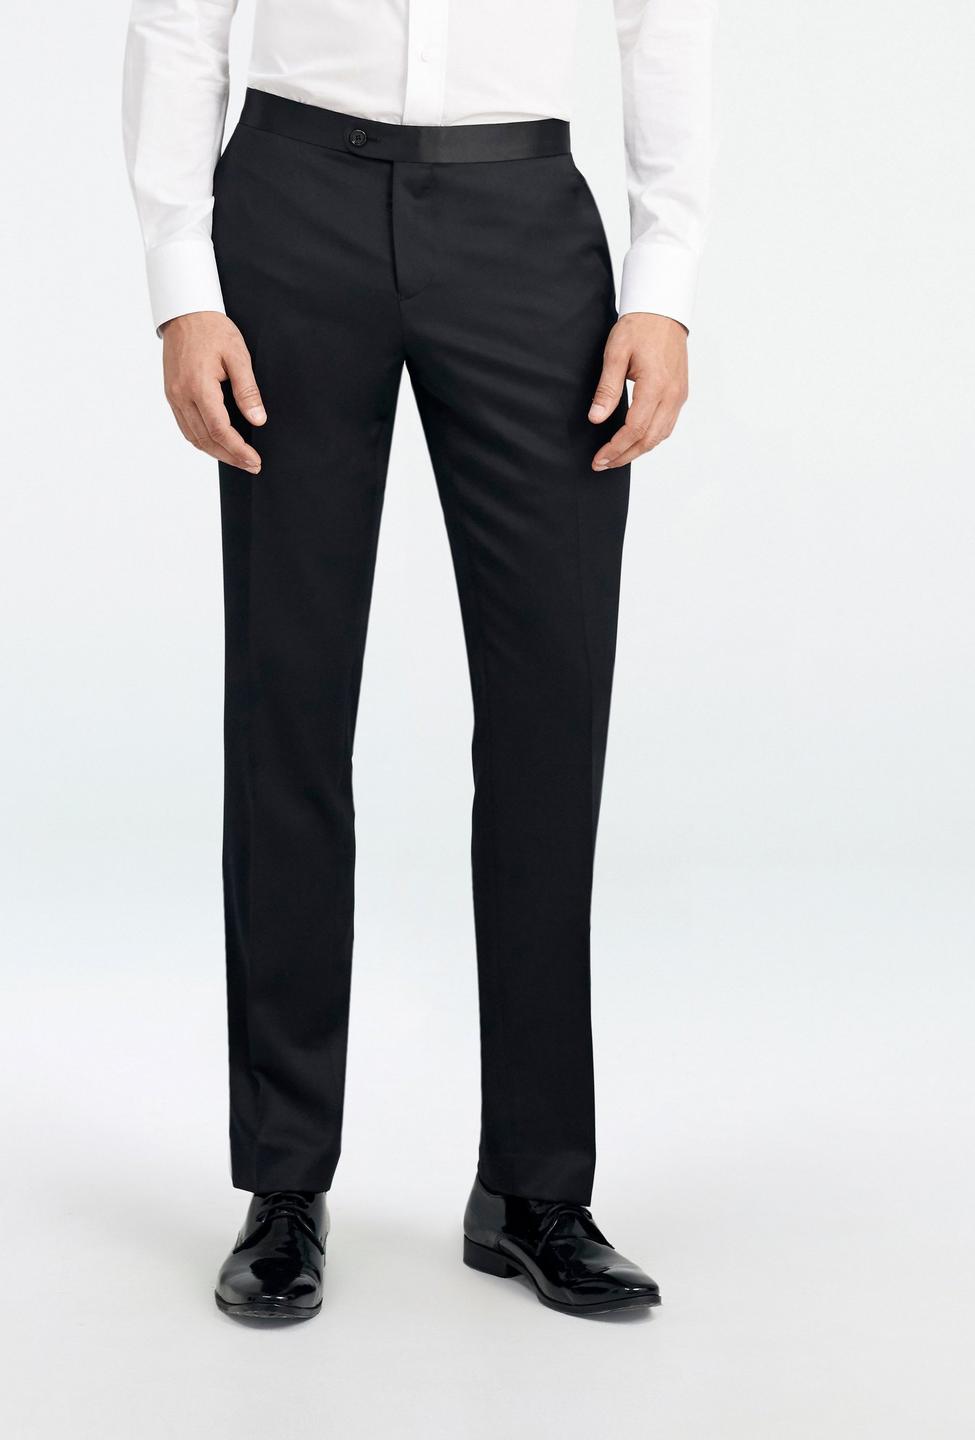 Black pants - Hampton Solid Design from Premium Indochino Collection